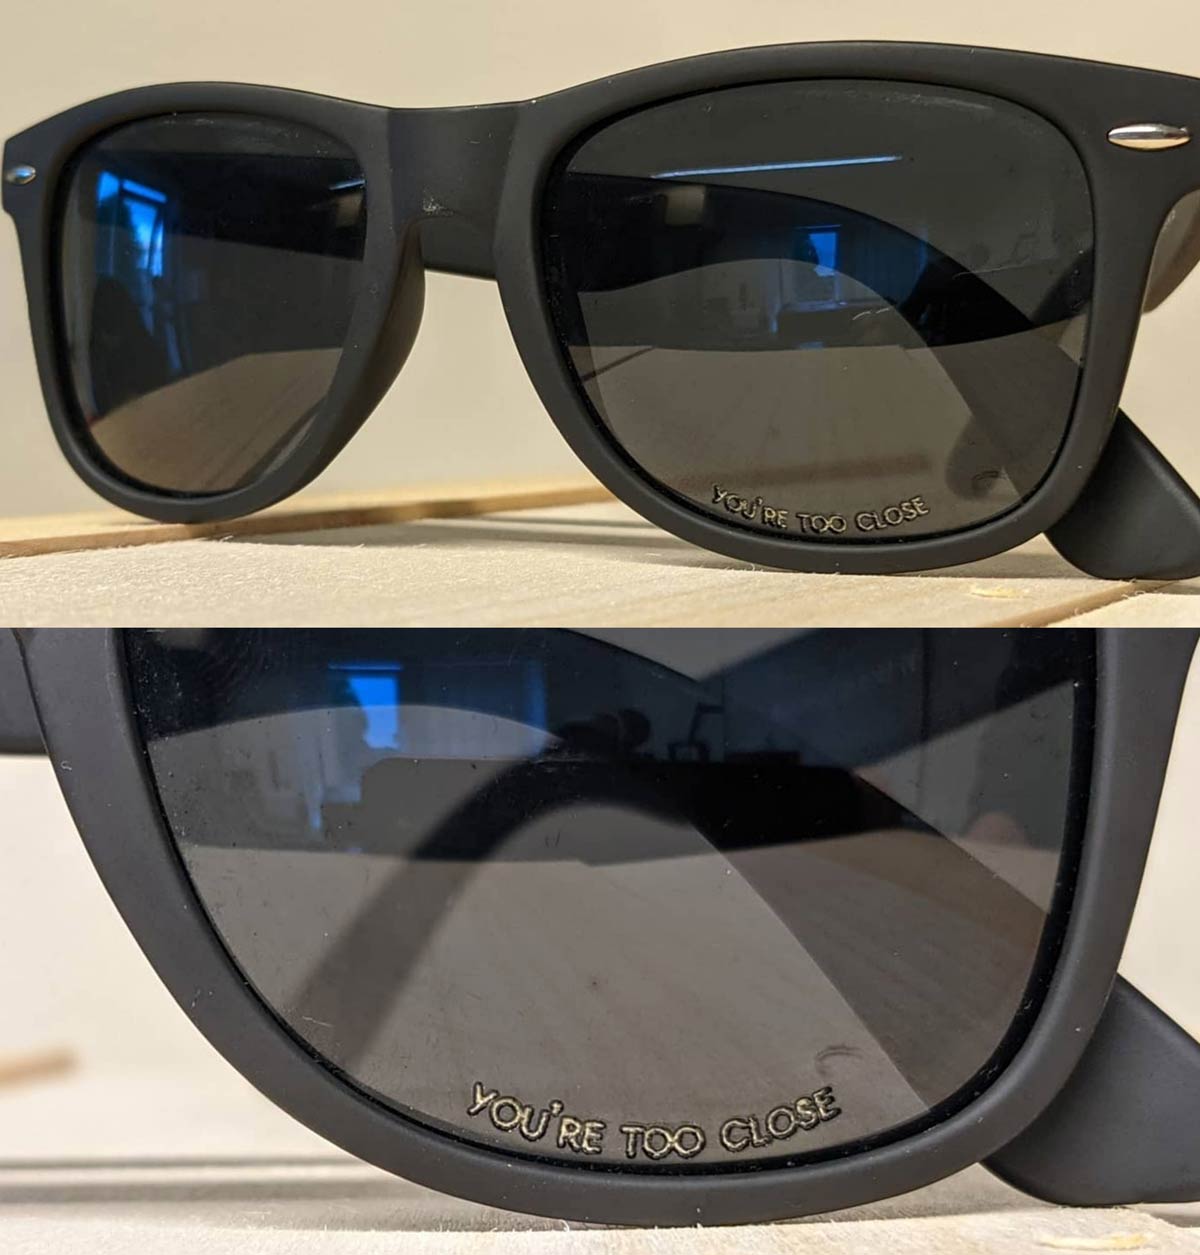 Customized my sunglasses ready for a post-lockdown summer